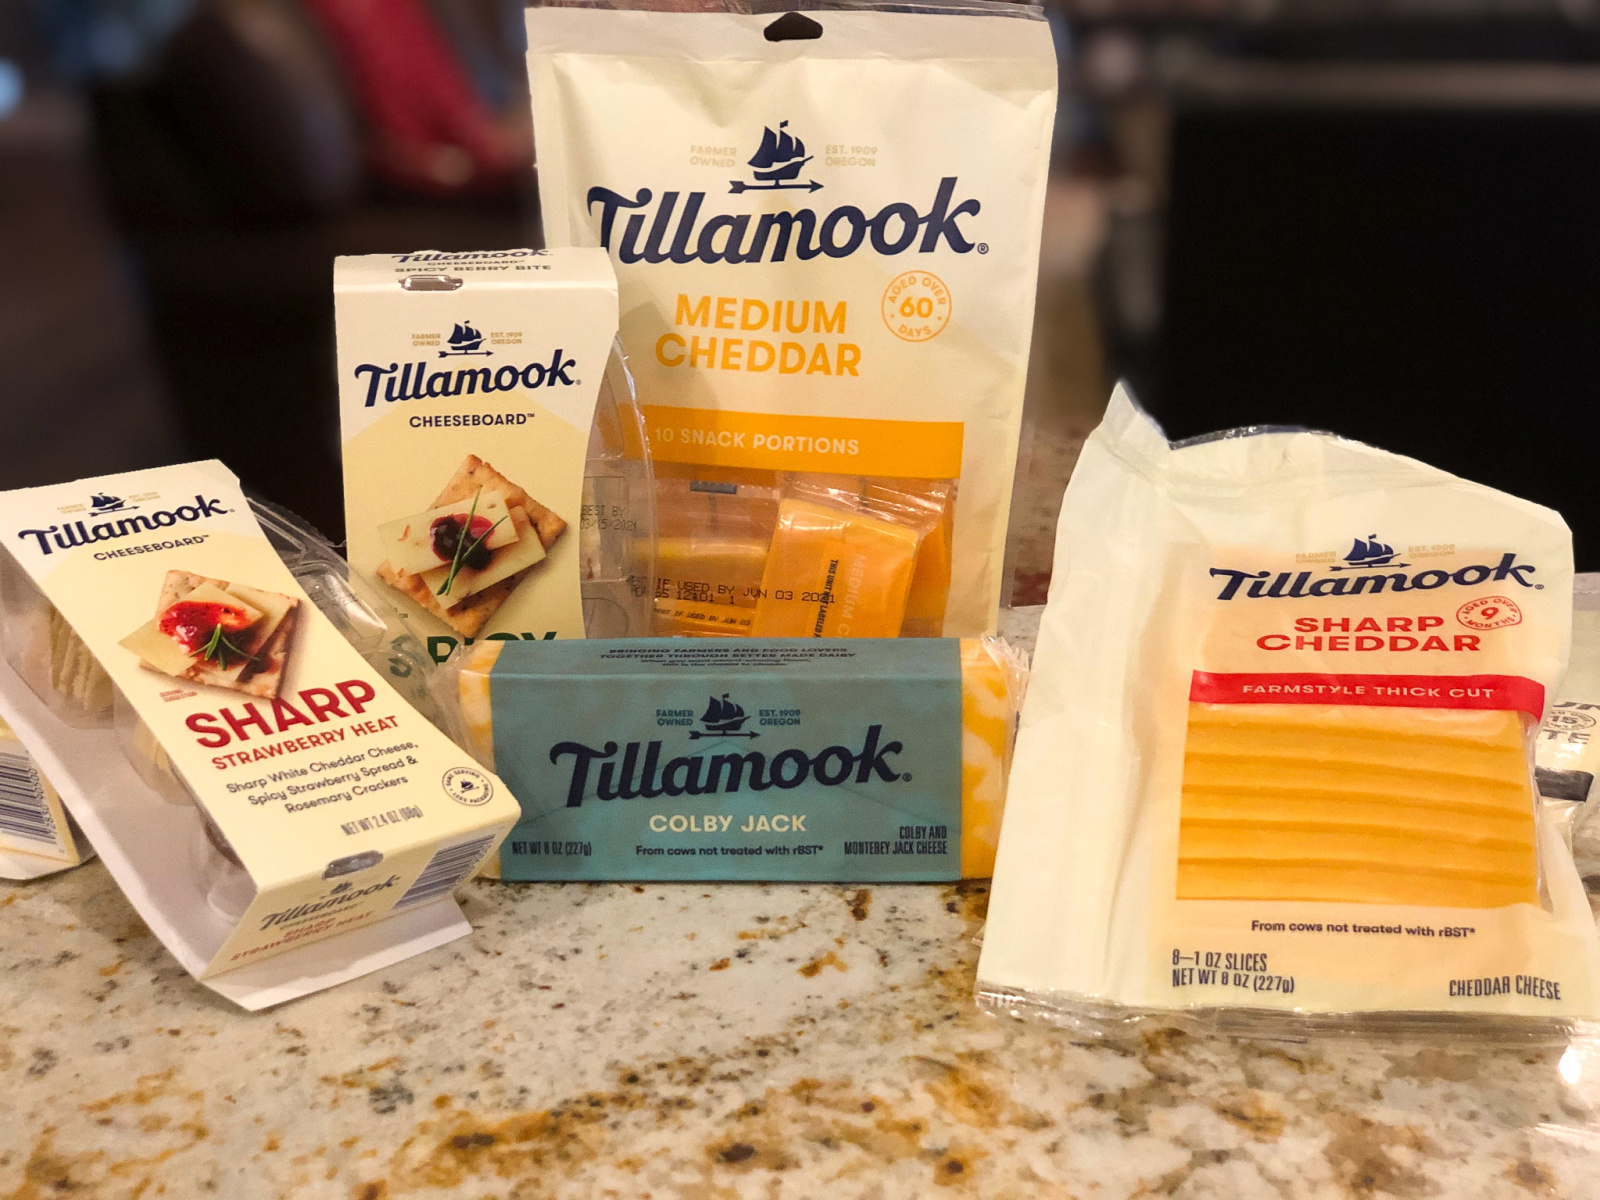 Start Your New Year With Great Savings On Tillamook At Publix on I Heart Publix 1